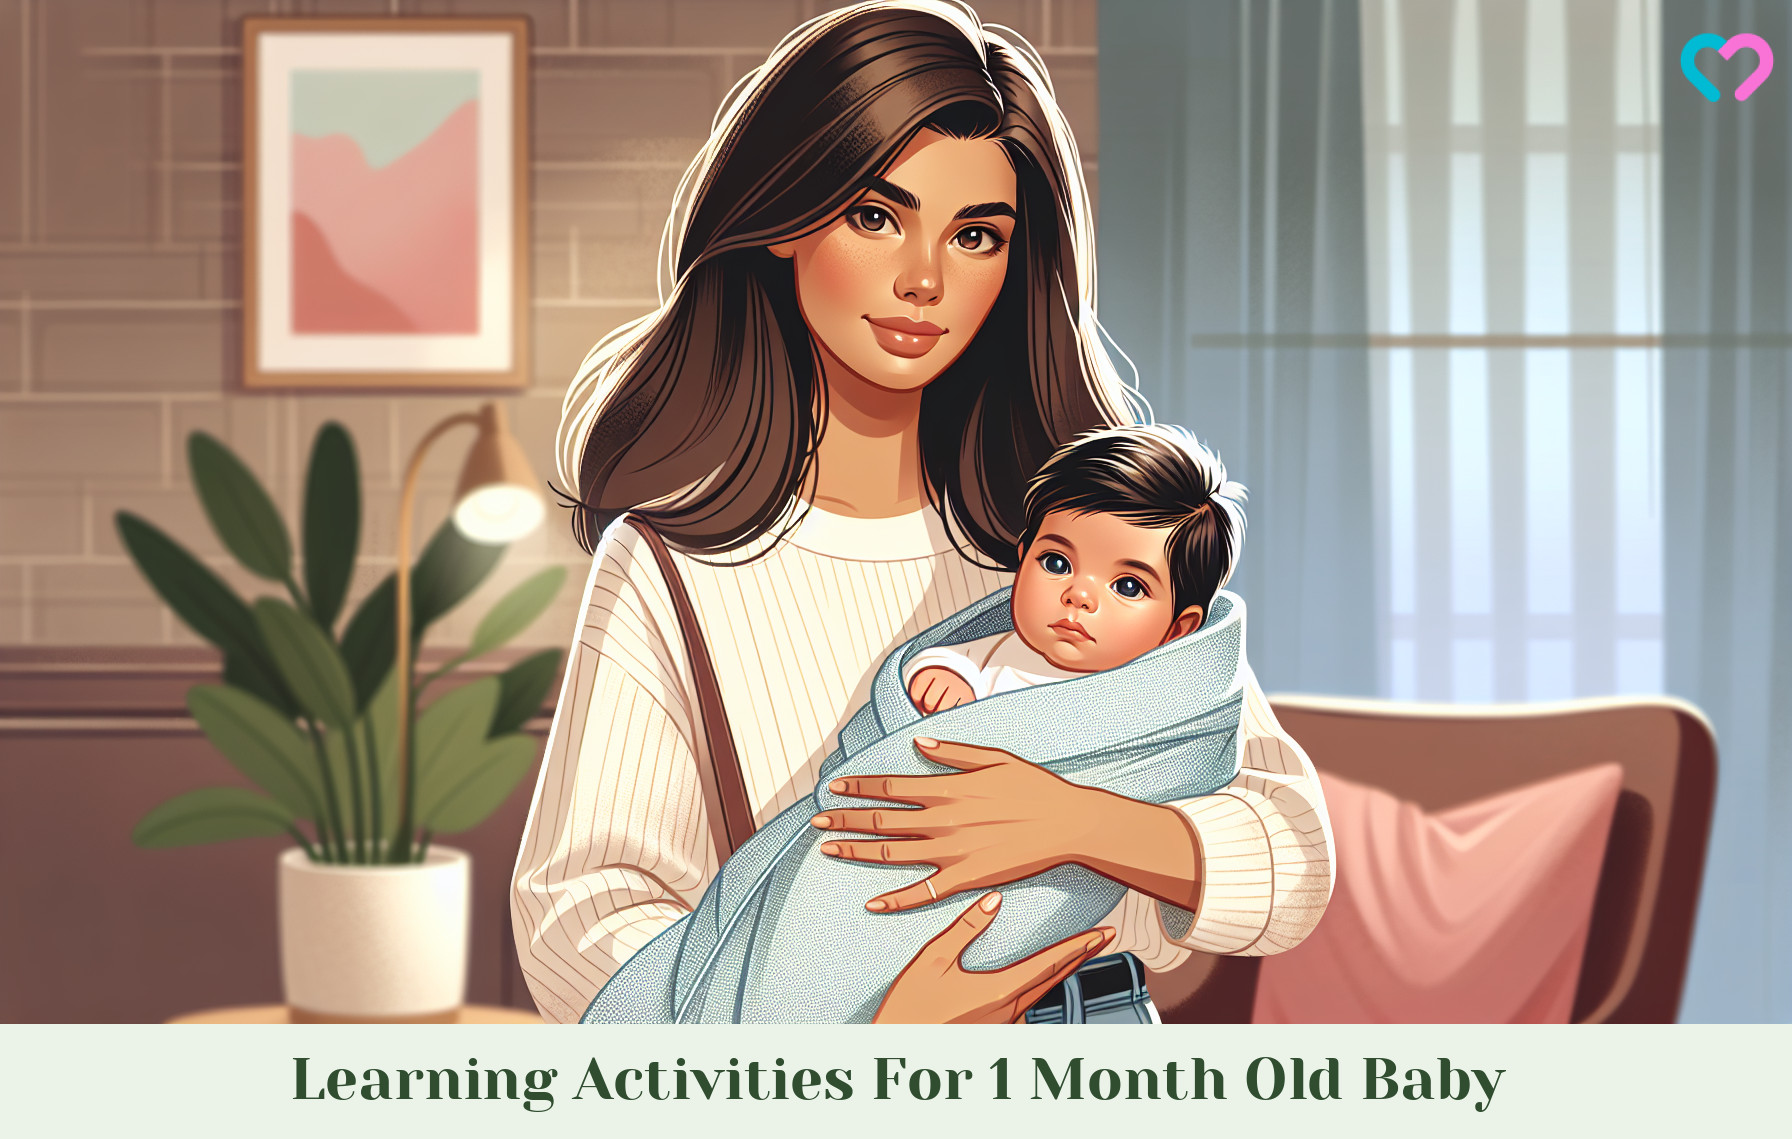 Learning Activities For 1 Month Old Baby_illustration